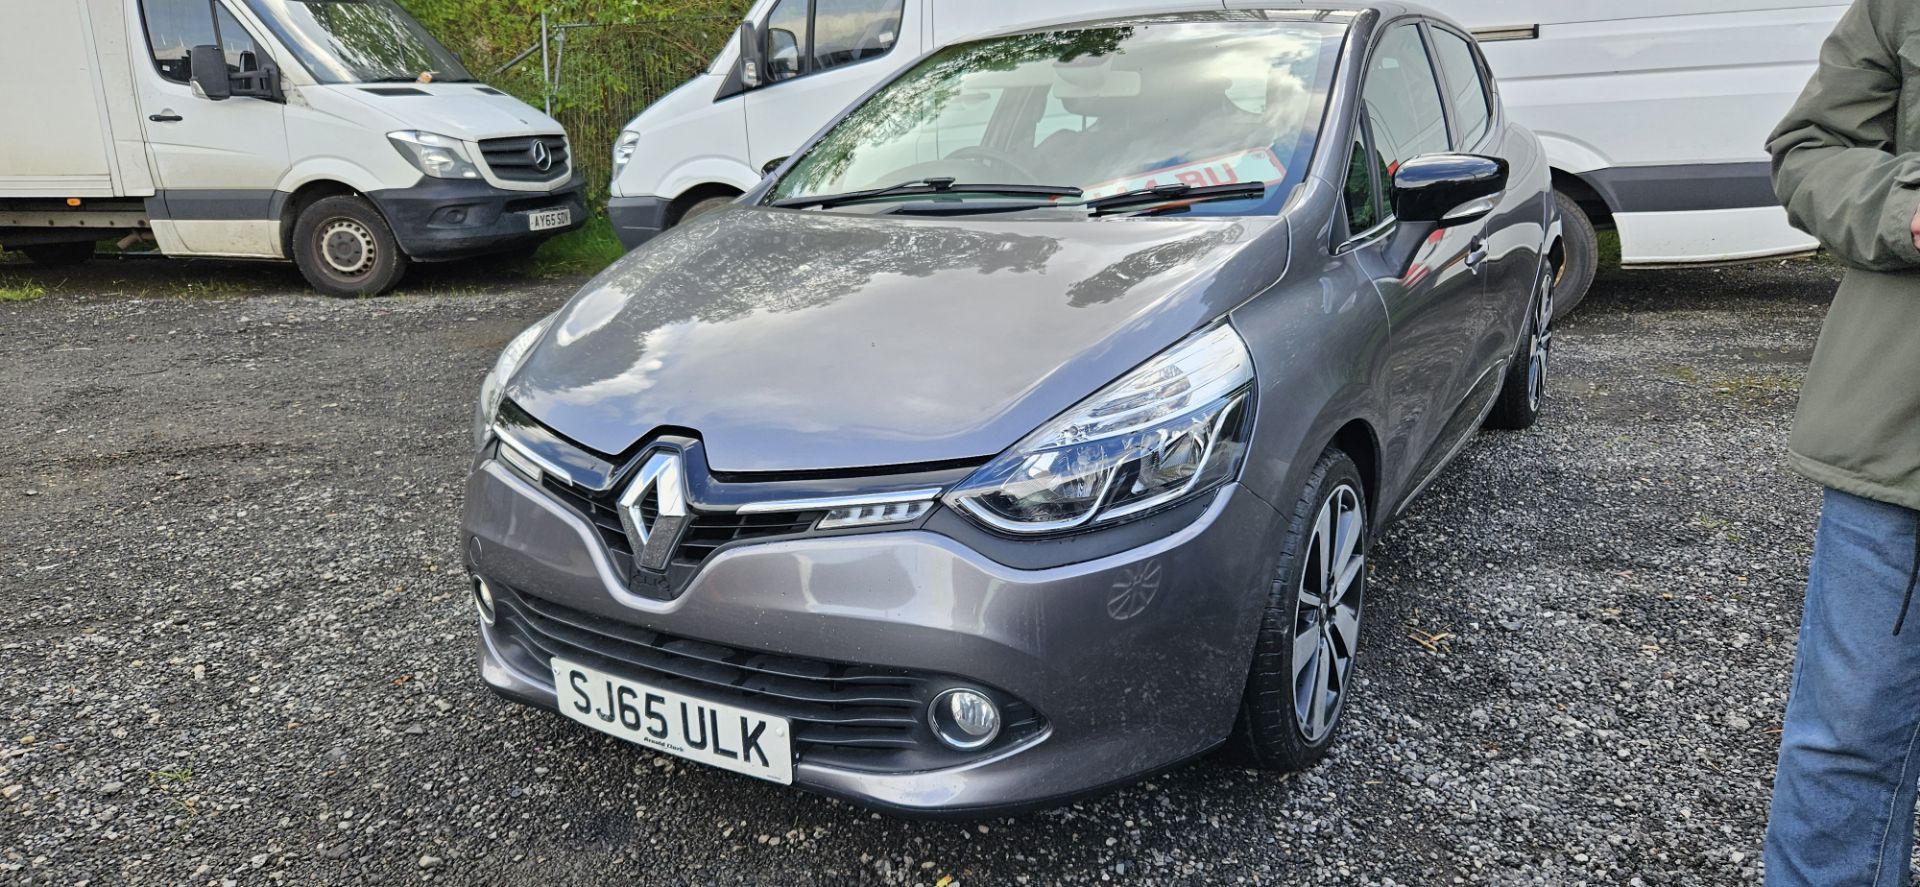 2016 RENAULT CLIO AUTOMATIC - Image 3 of 7